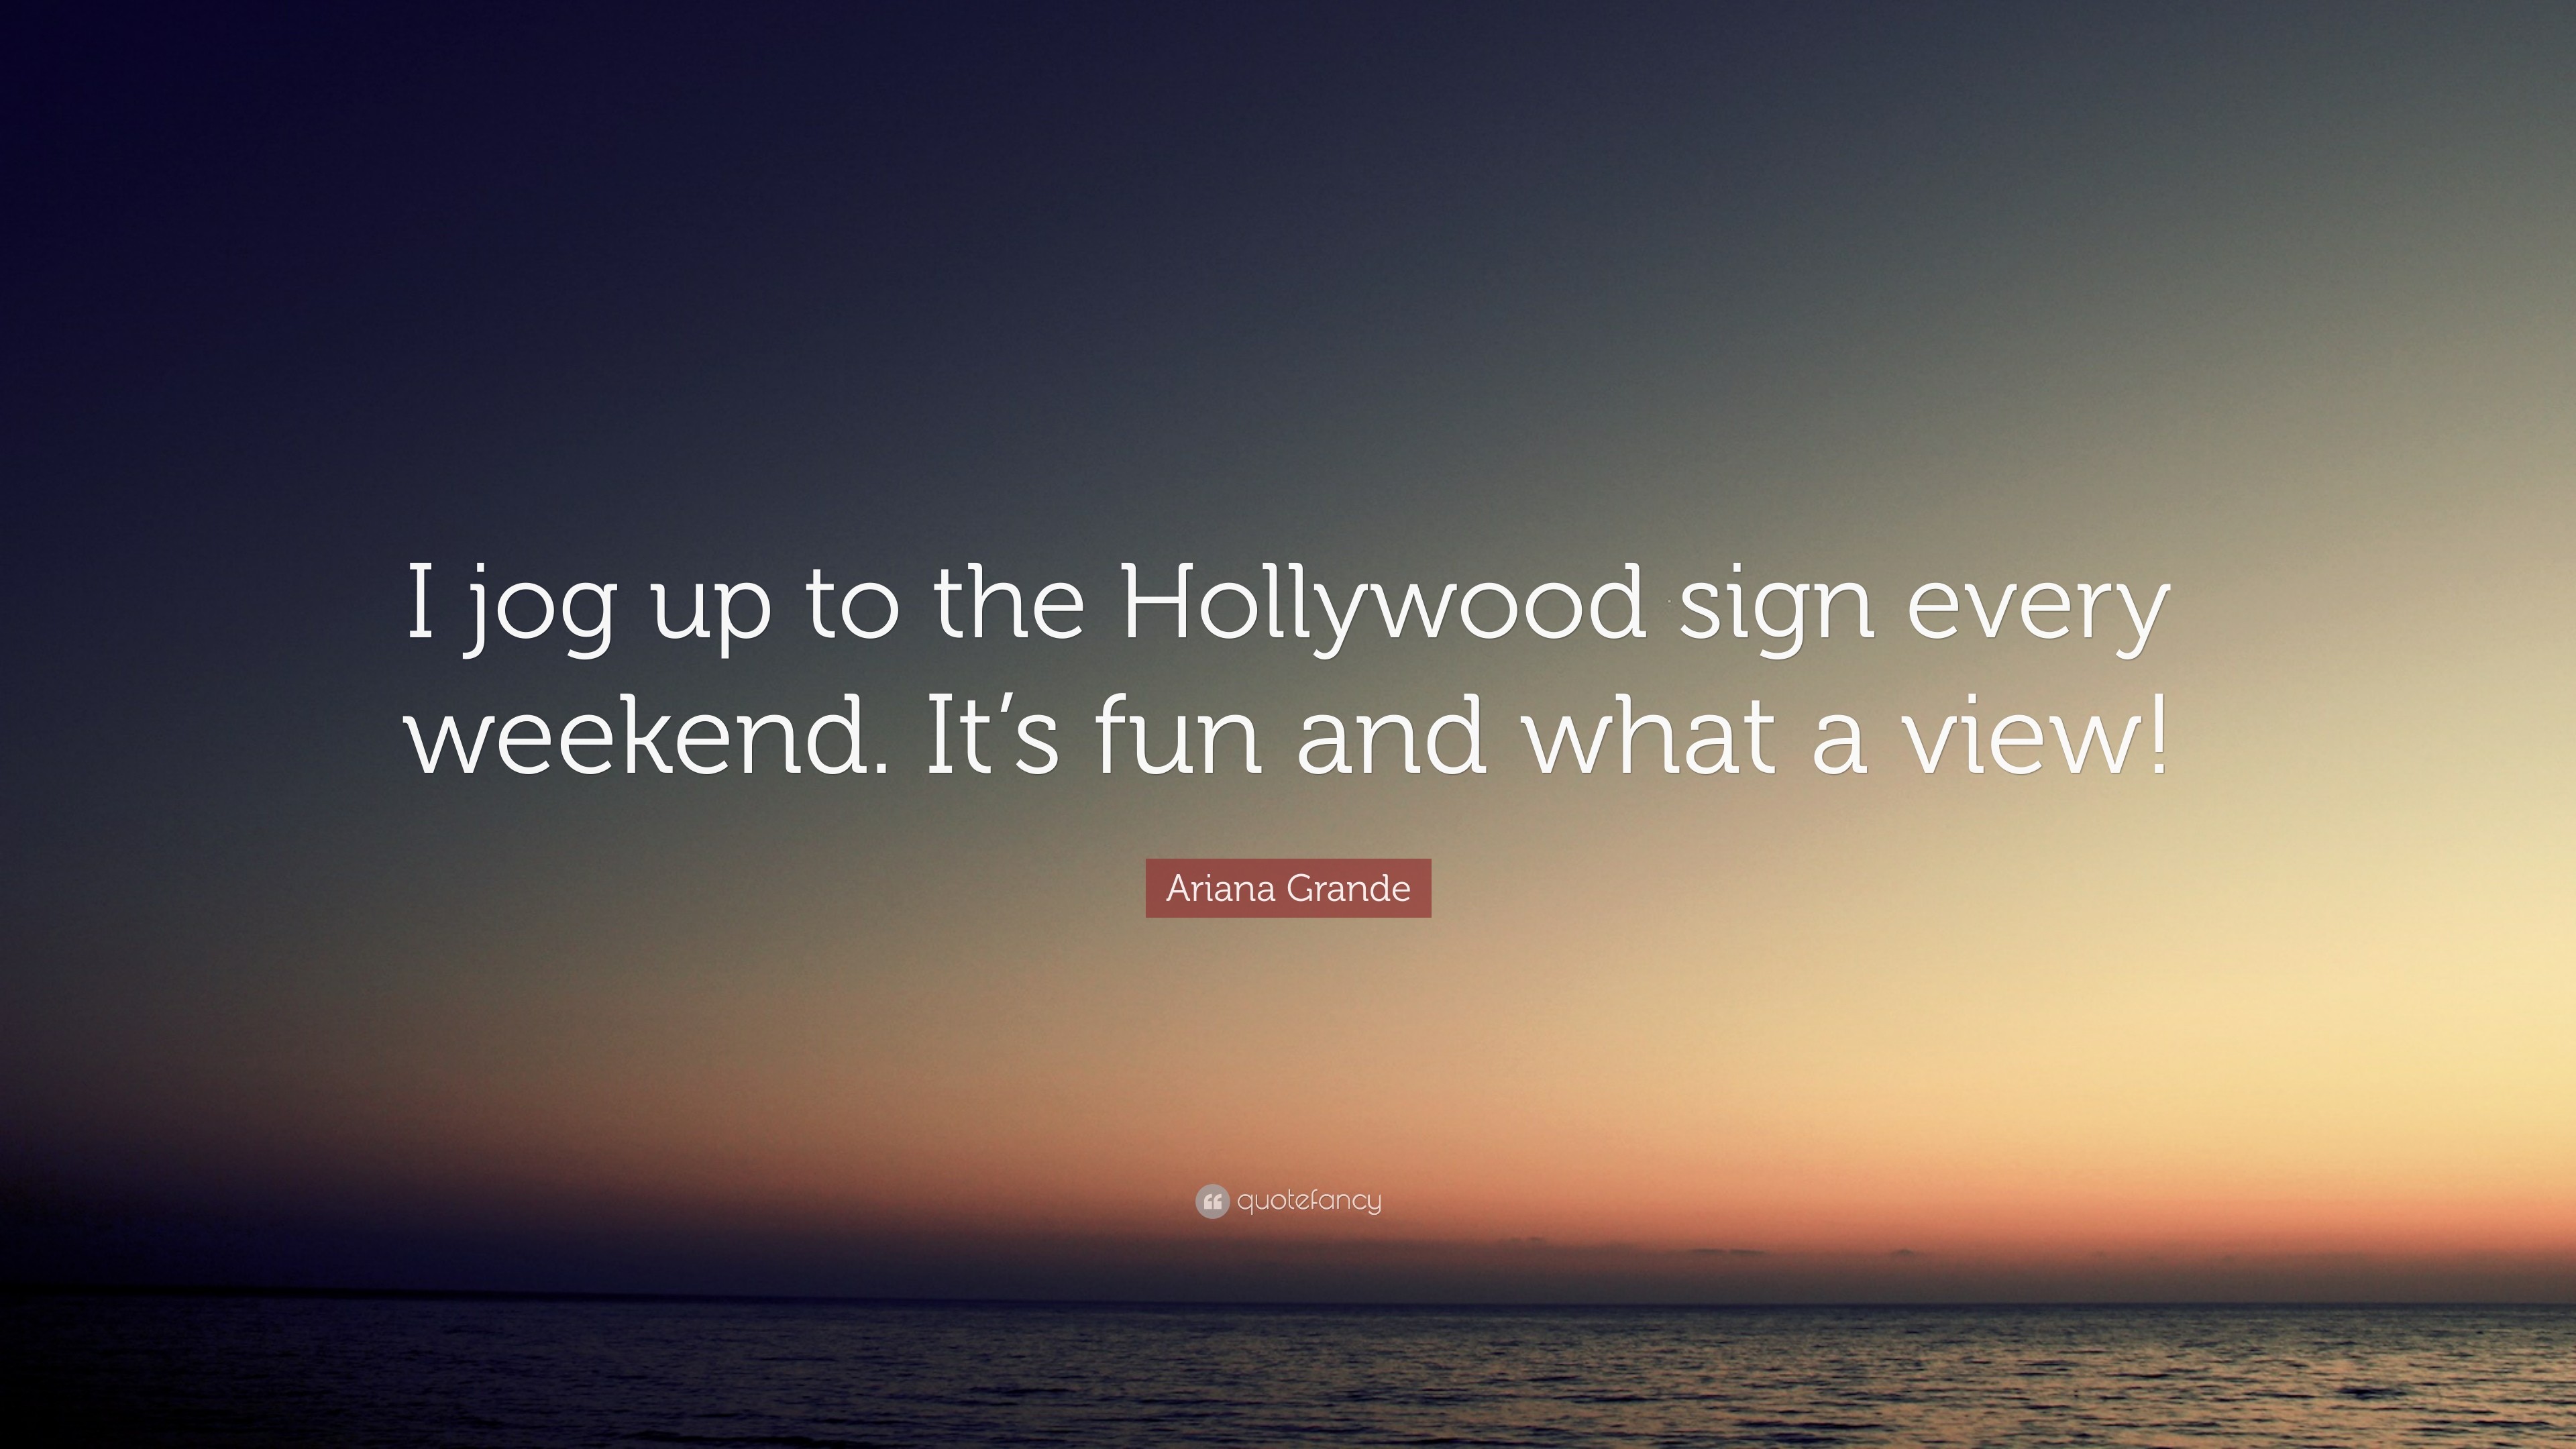 3840x2160 Ariana Grande Quote: “I jog up to the Hollywood sign every weekend. It's